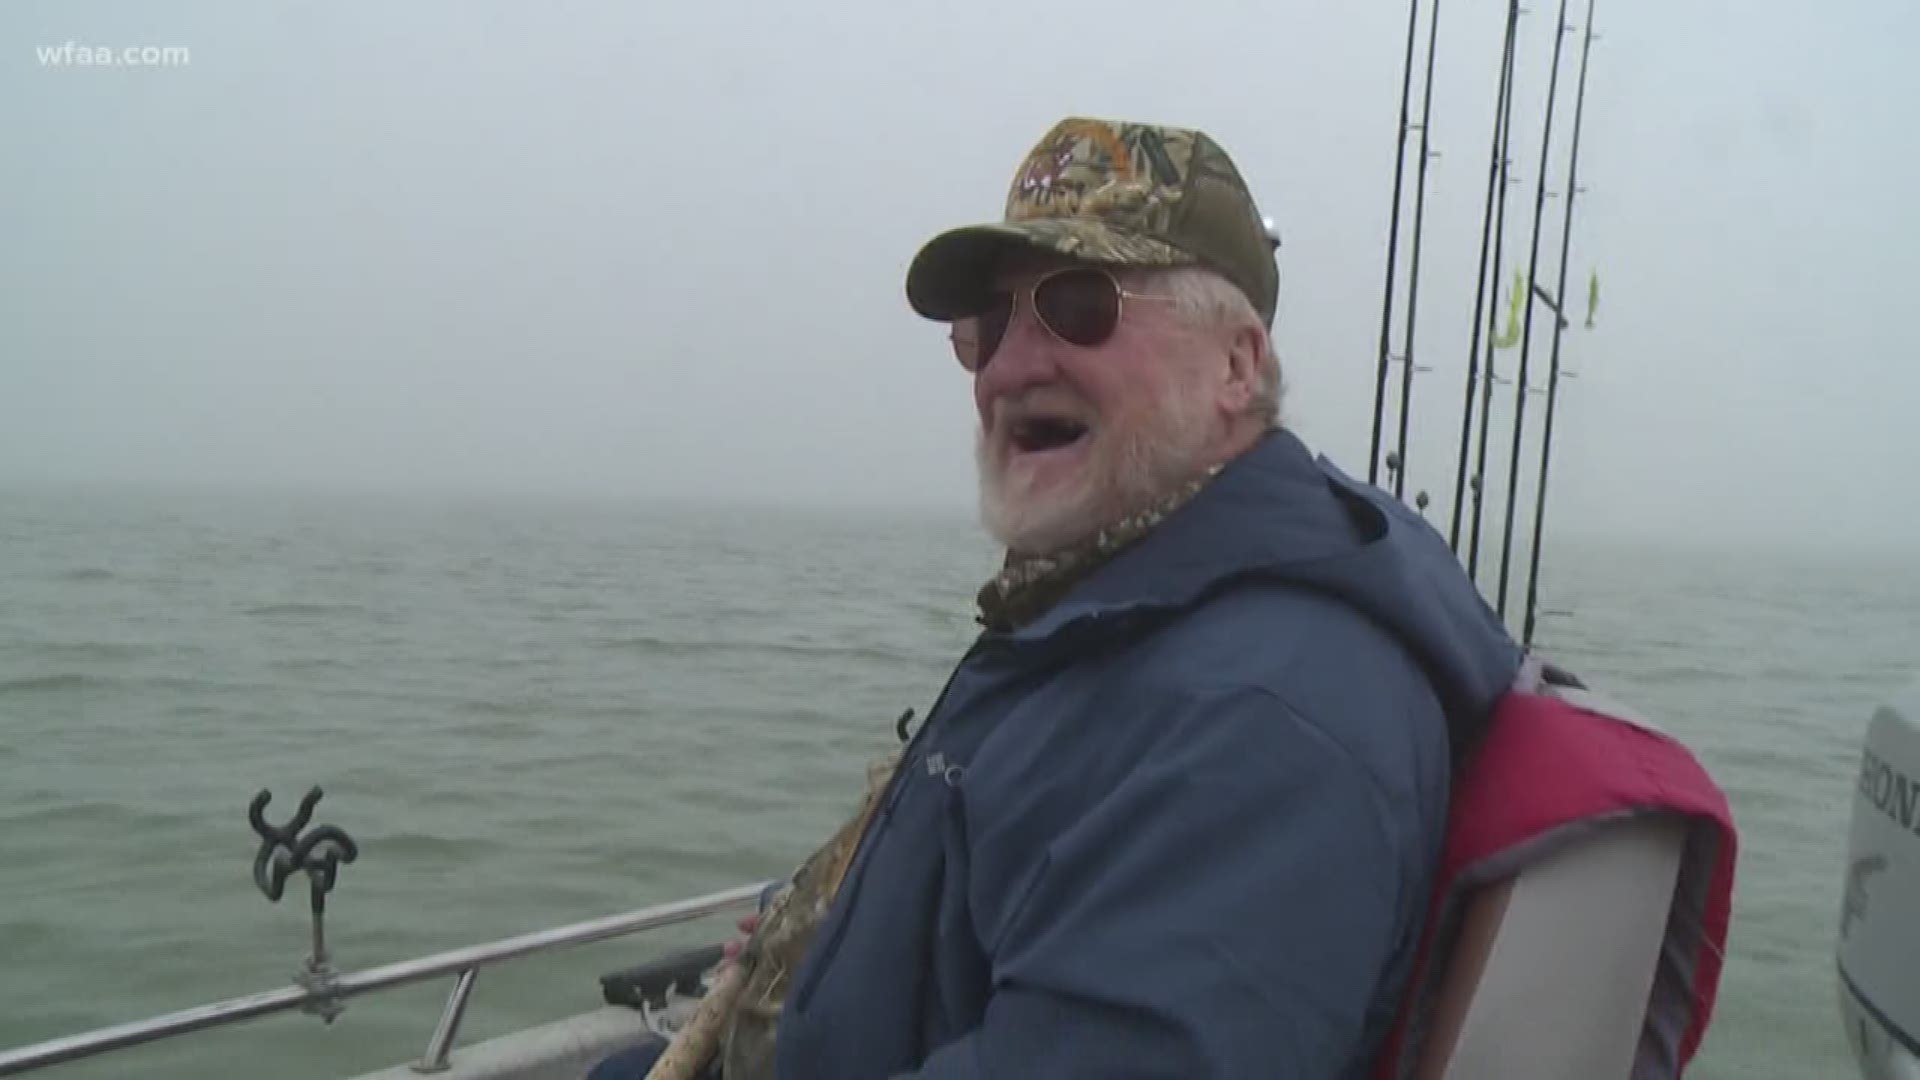 He hasn't been on the water in the nearly three years since Hurricane Harvey hit. But that all changed